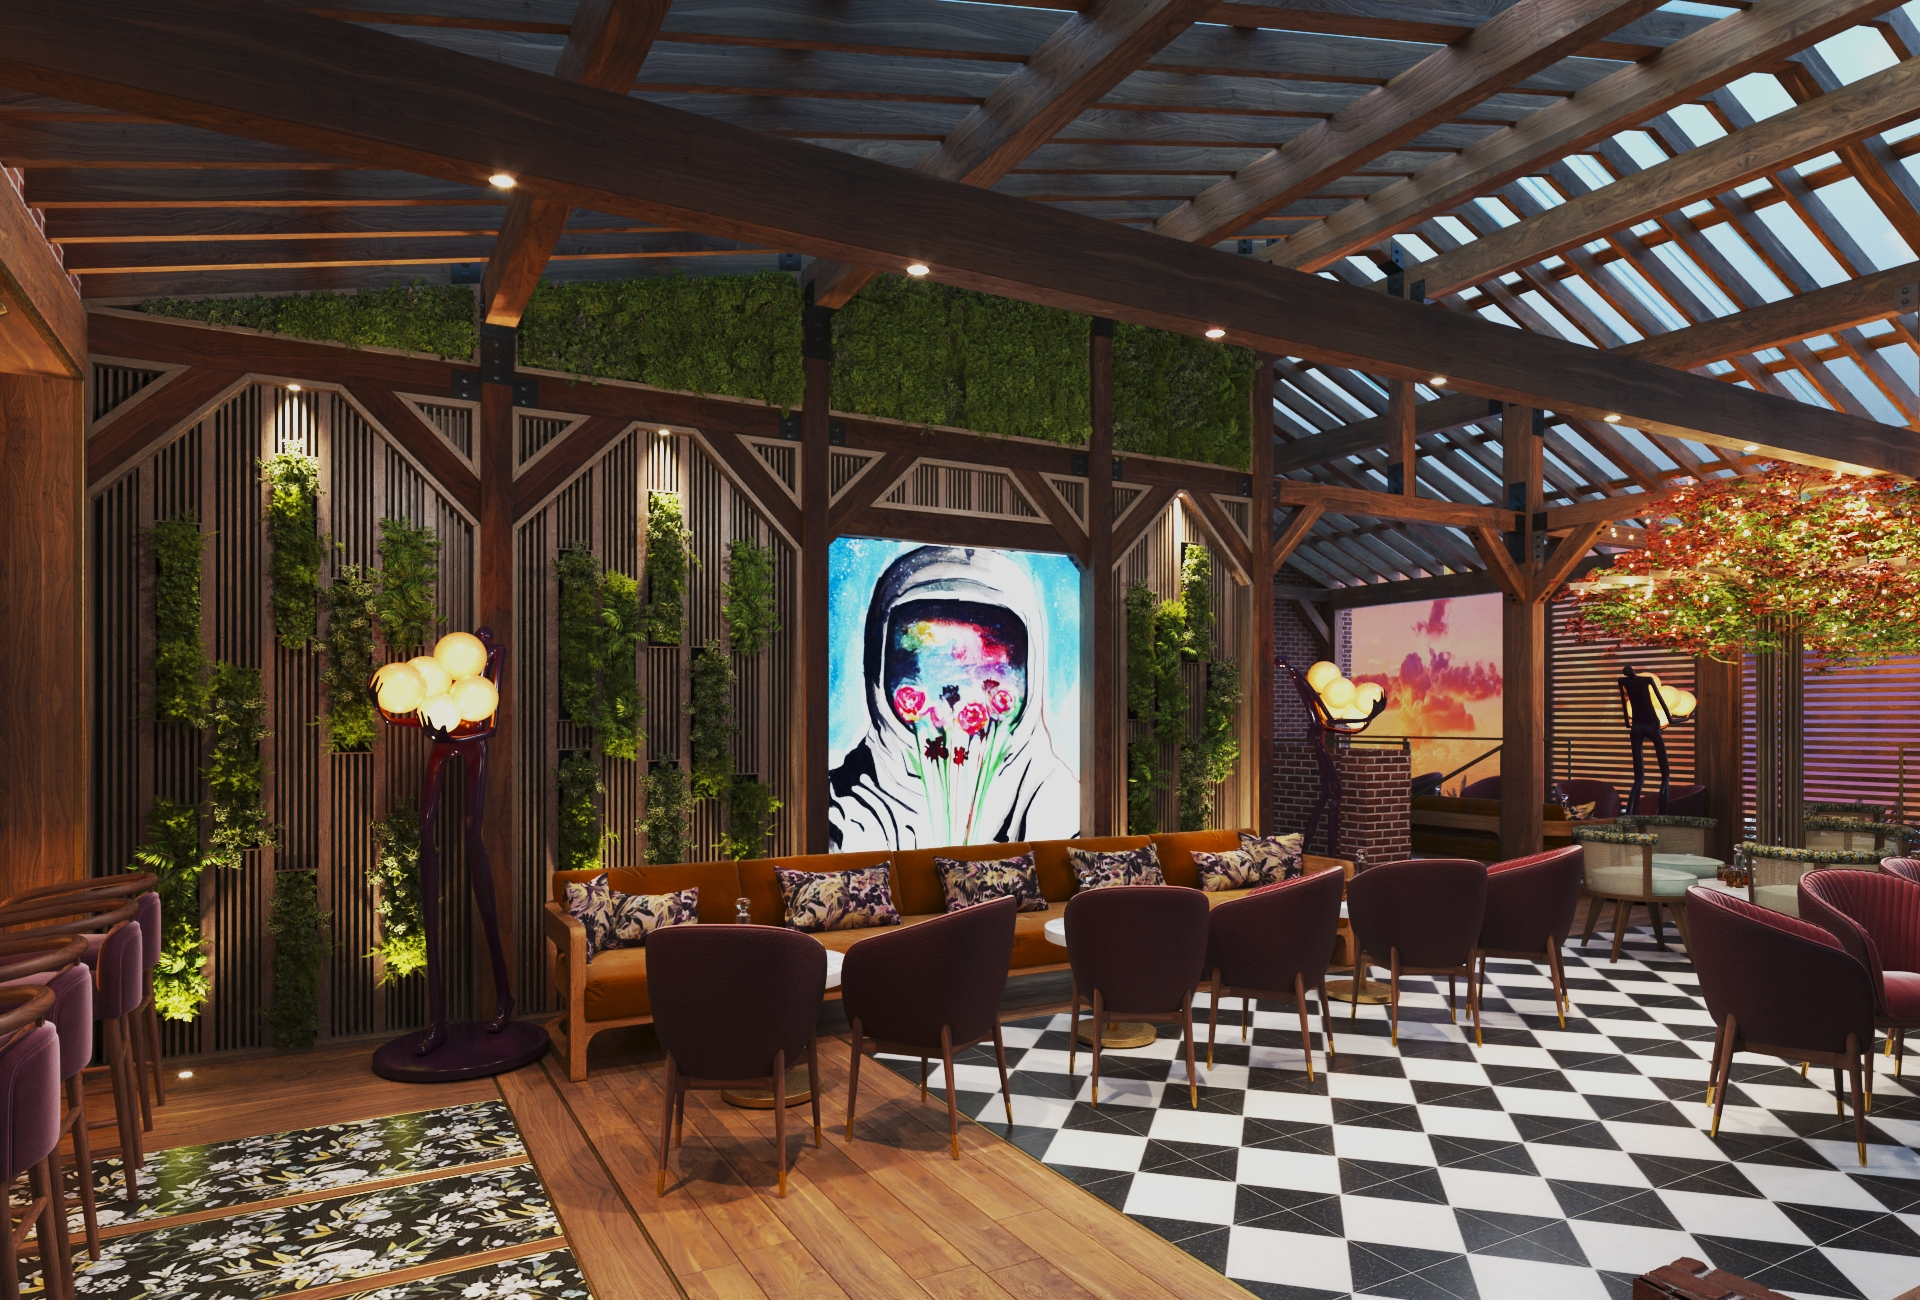 Animoca Brands and Planet Hollywood to Launch CLUB 3, a Physical Private  Club with Exclusive Perks and Experiential Programming for Web3 Community |  Business Wire